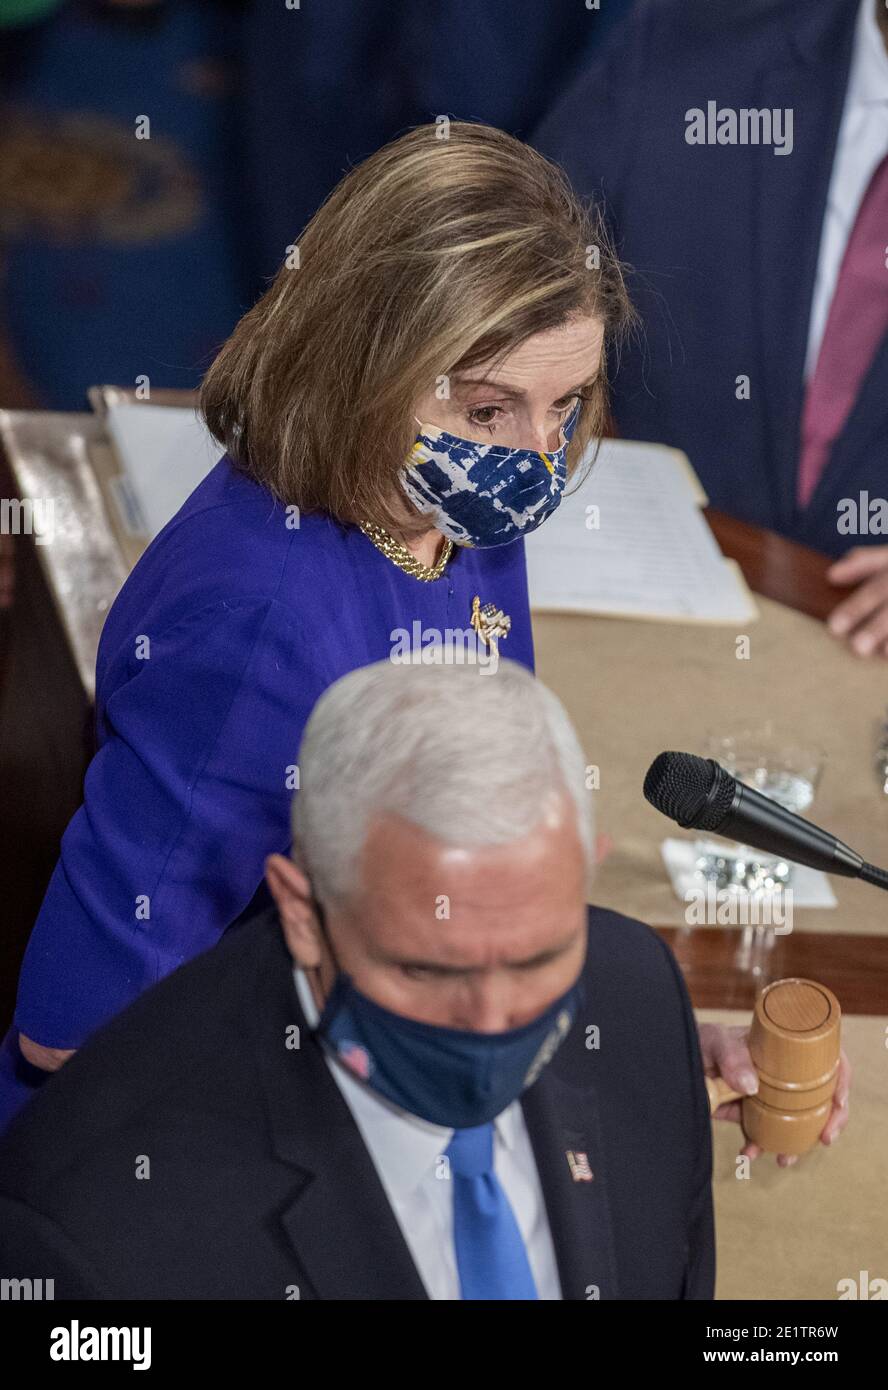 Washington, United States. 09th Jan, 2021. House Speaker Nancy Pelosi and Vice President Mike Pence oversee a joint session of Congress the U.S. Capitol in Washington, DC on Wednesday, January 6, 2021. A pro-Trump mob broke into the U.S. Capitol causing destruction, an evacuation and at least four deaths. After a long delay Congress certified Joe Biden's victory in the Presidential election. Photo by Pat Benic/UPI Credit: UPI/Alamy Live News Stock Photo